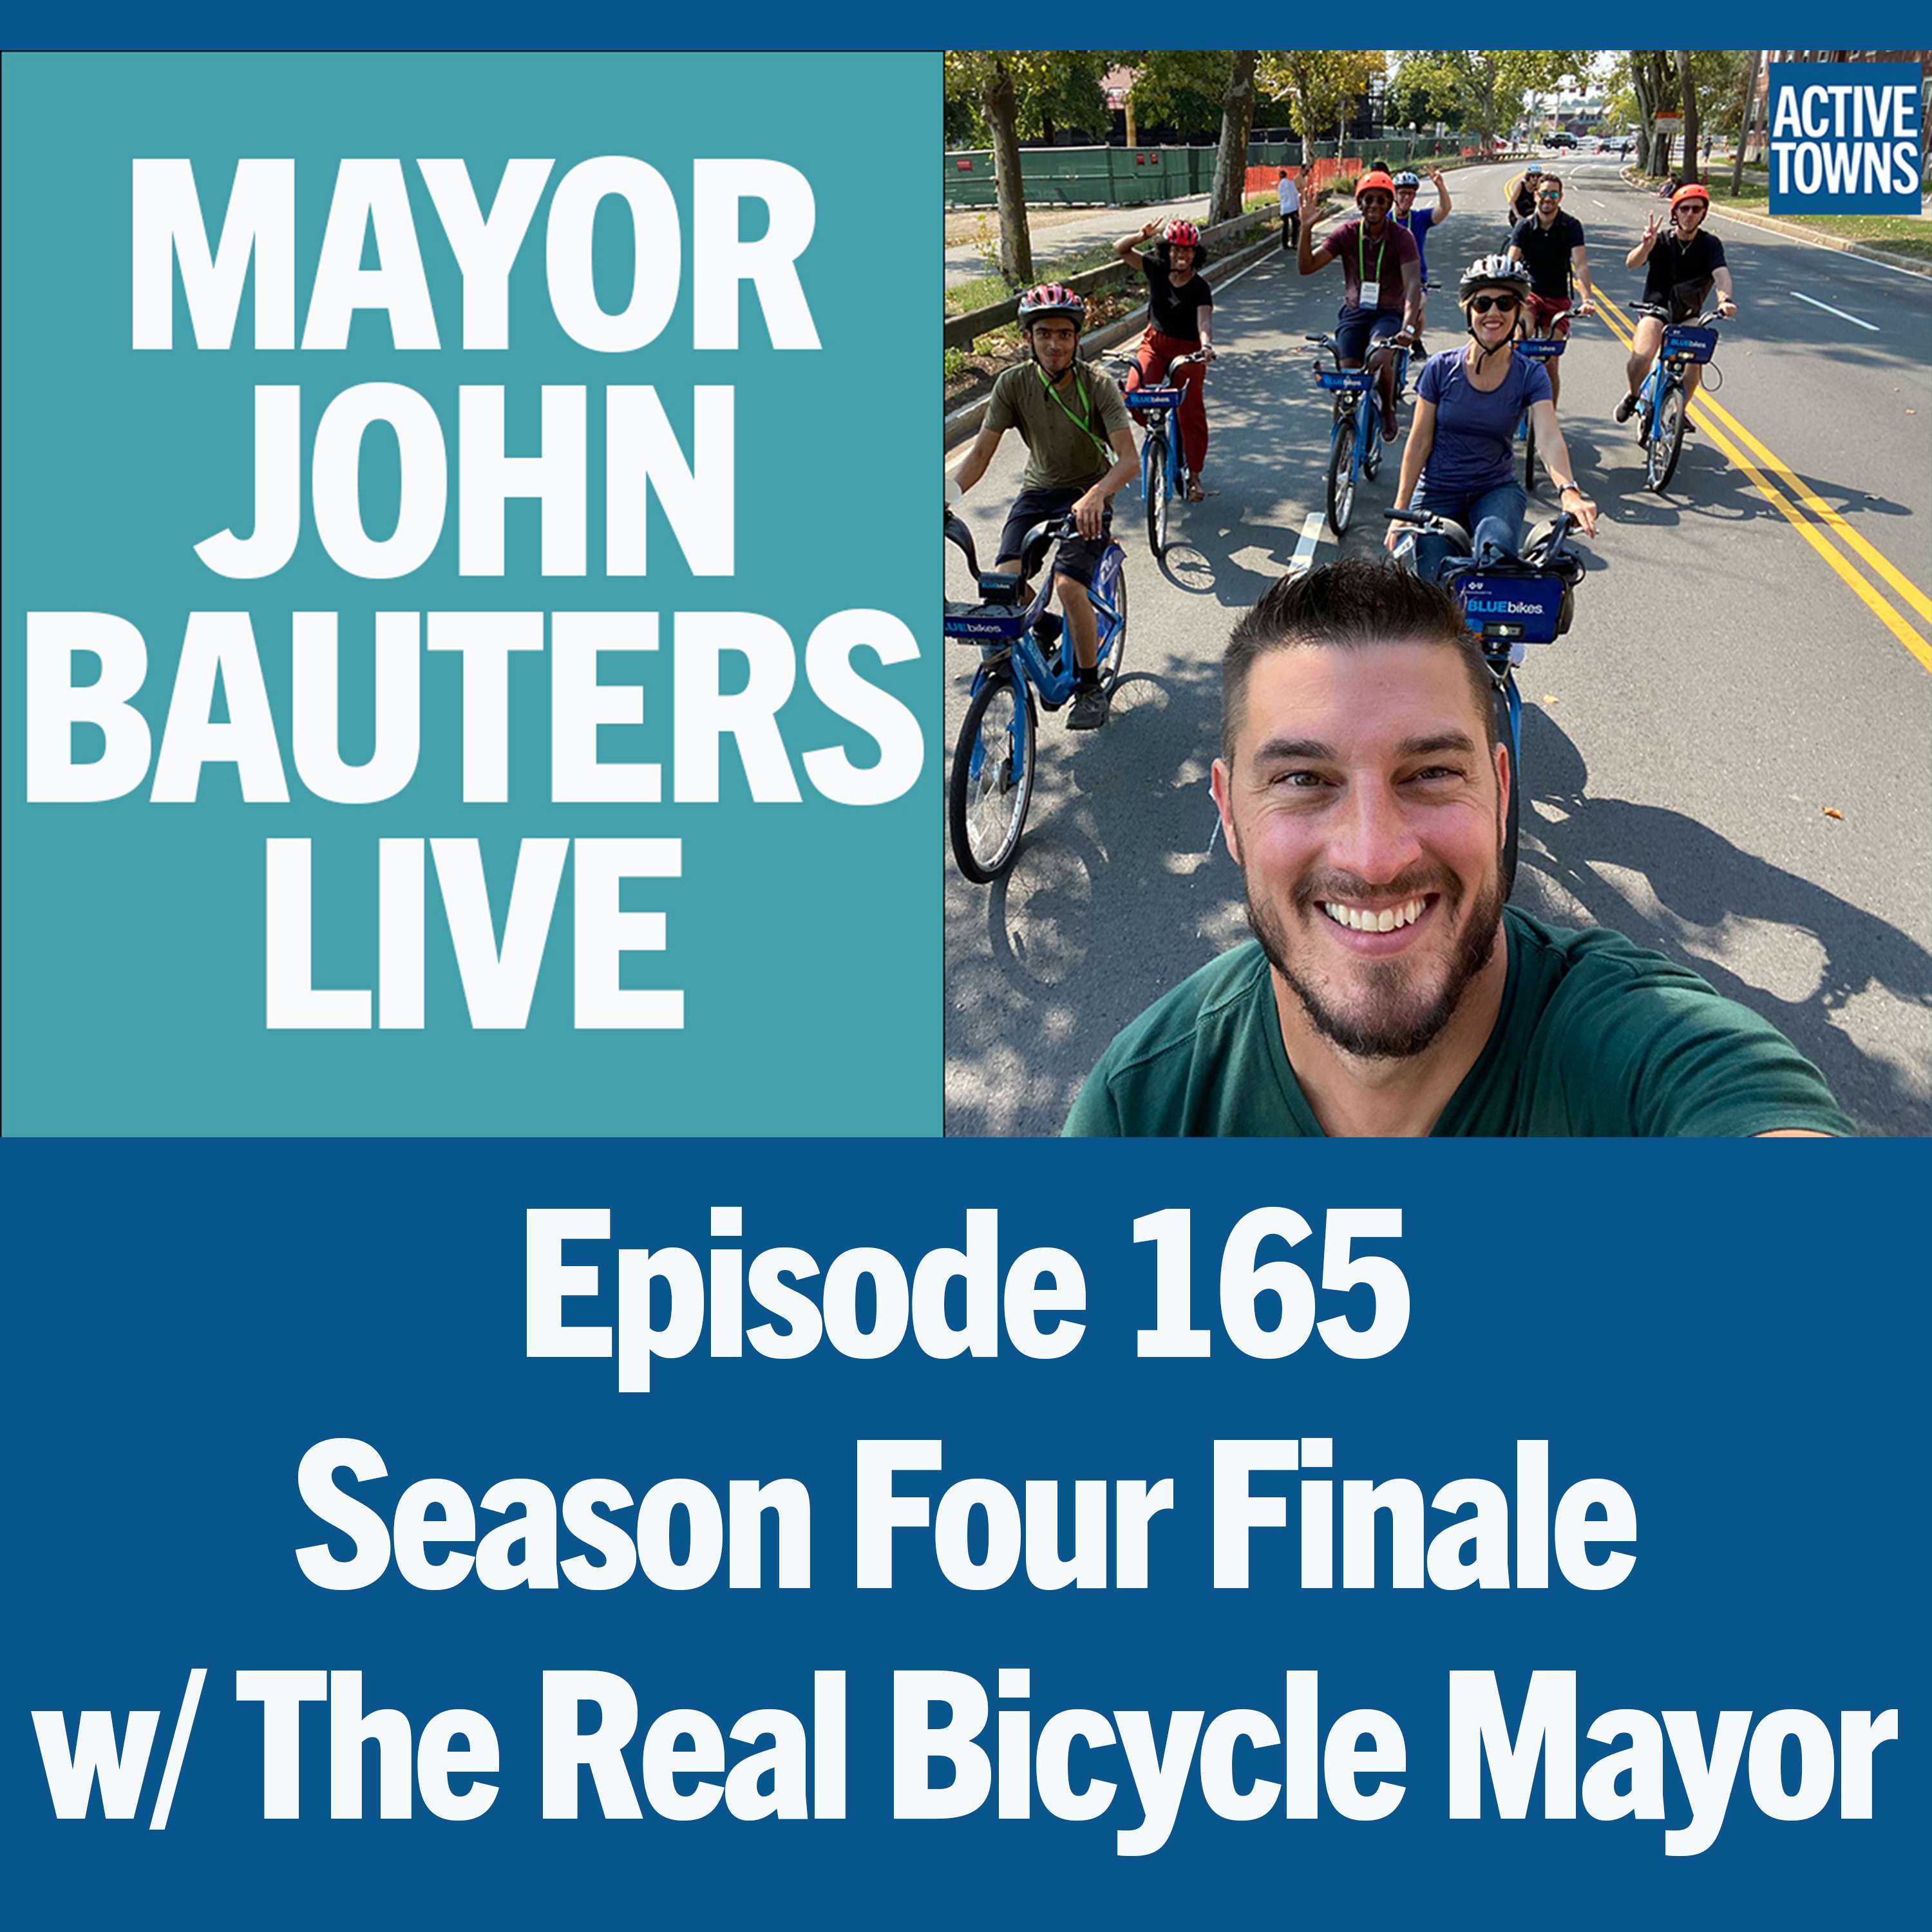 The Real Bicycle Mayor w/ John Bauters (video available)